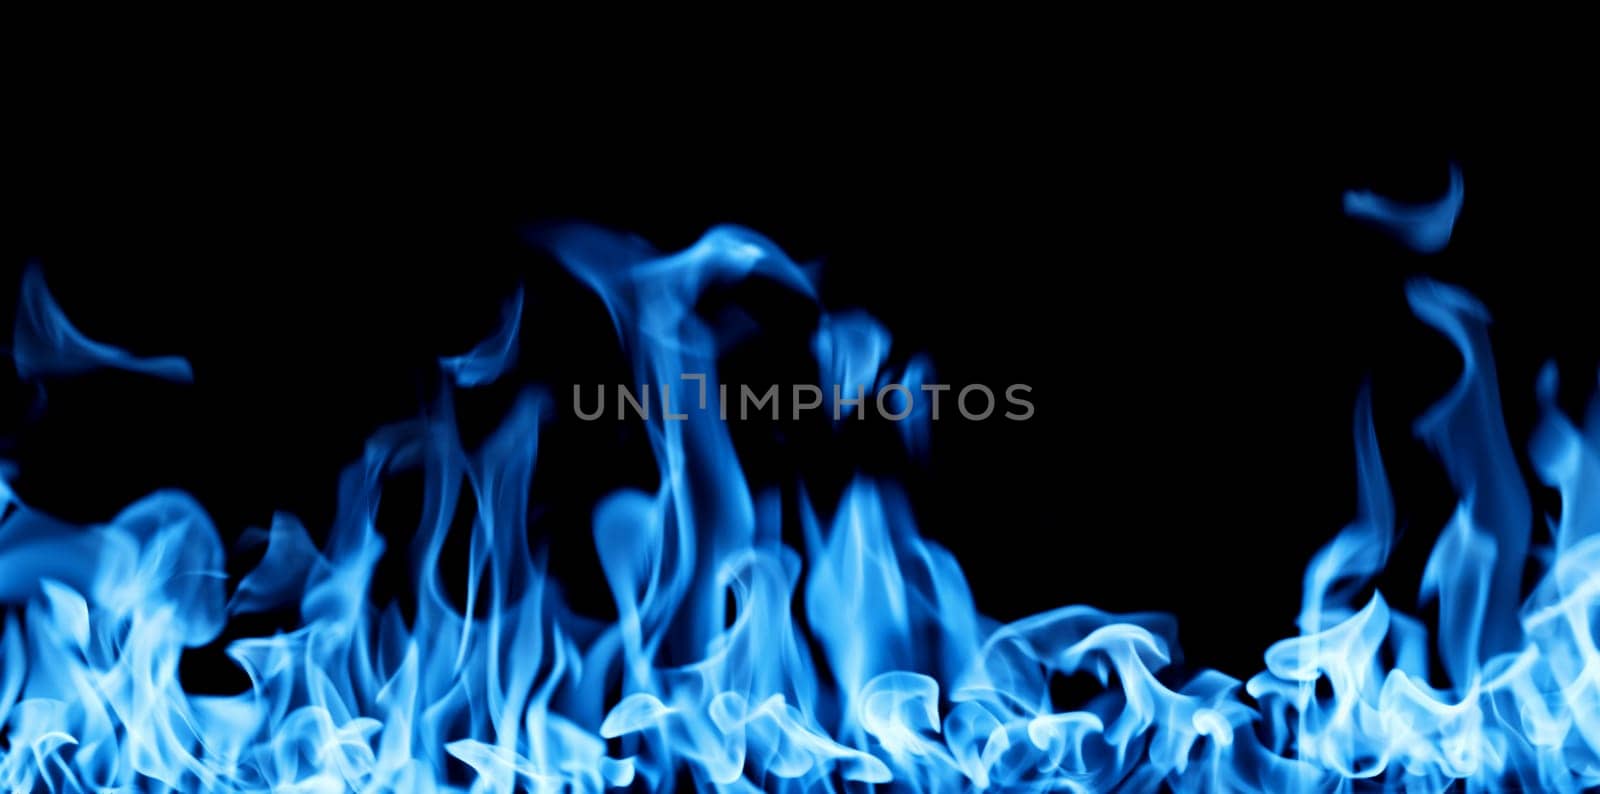 Blue firestorm. Gas Fire burning. Bright burning blue flames on a black background. Wall of Real fire, abstract background. Fire flames, isolated on dark background.